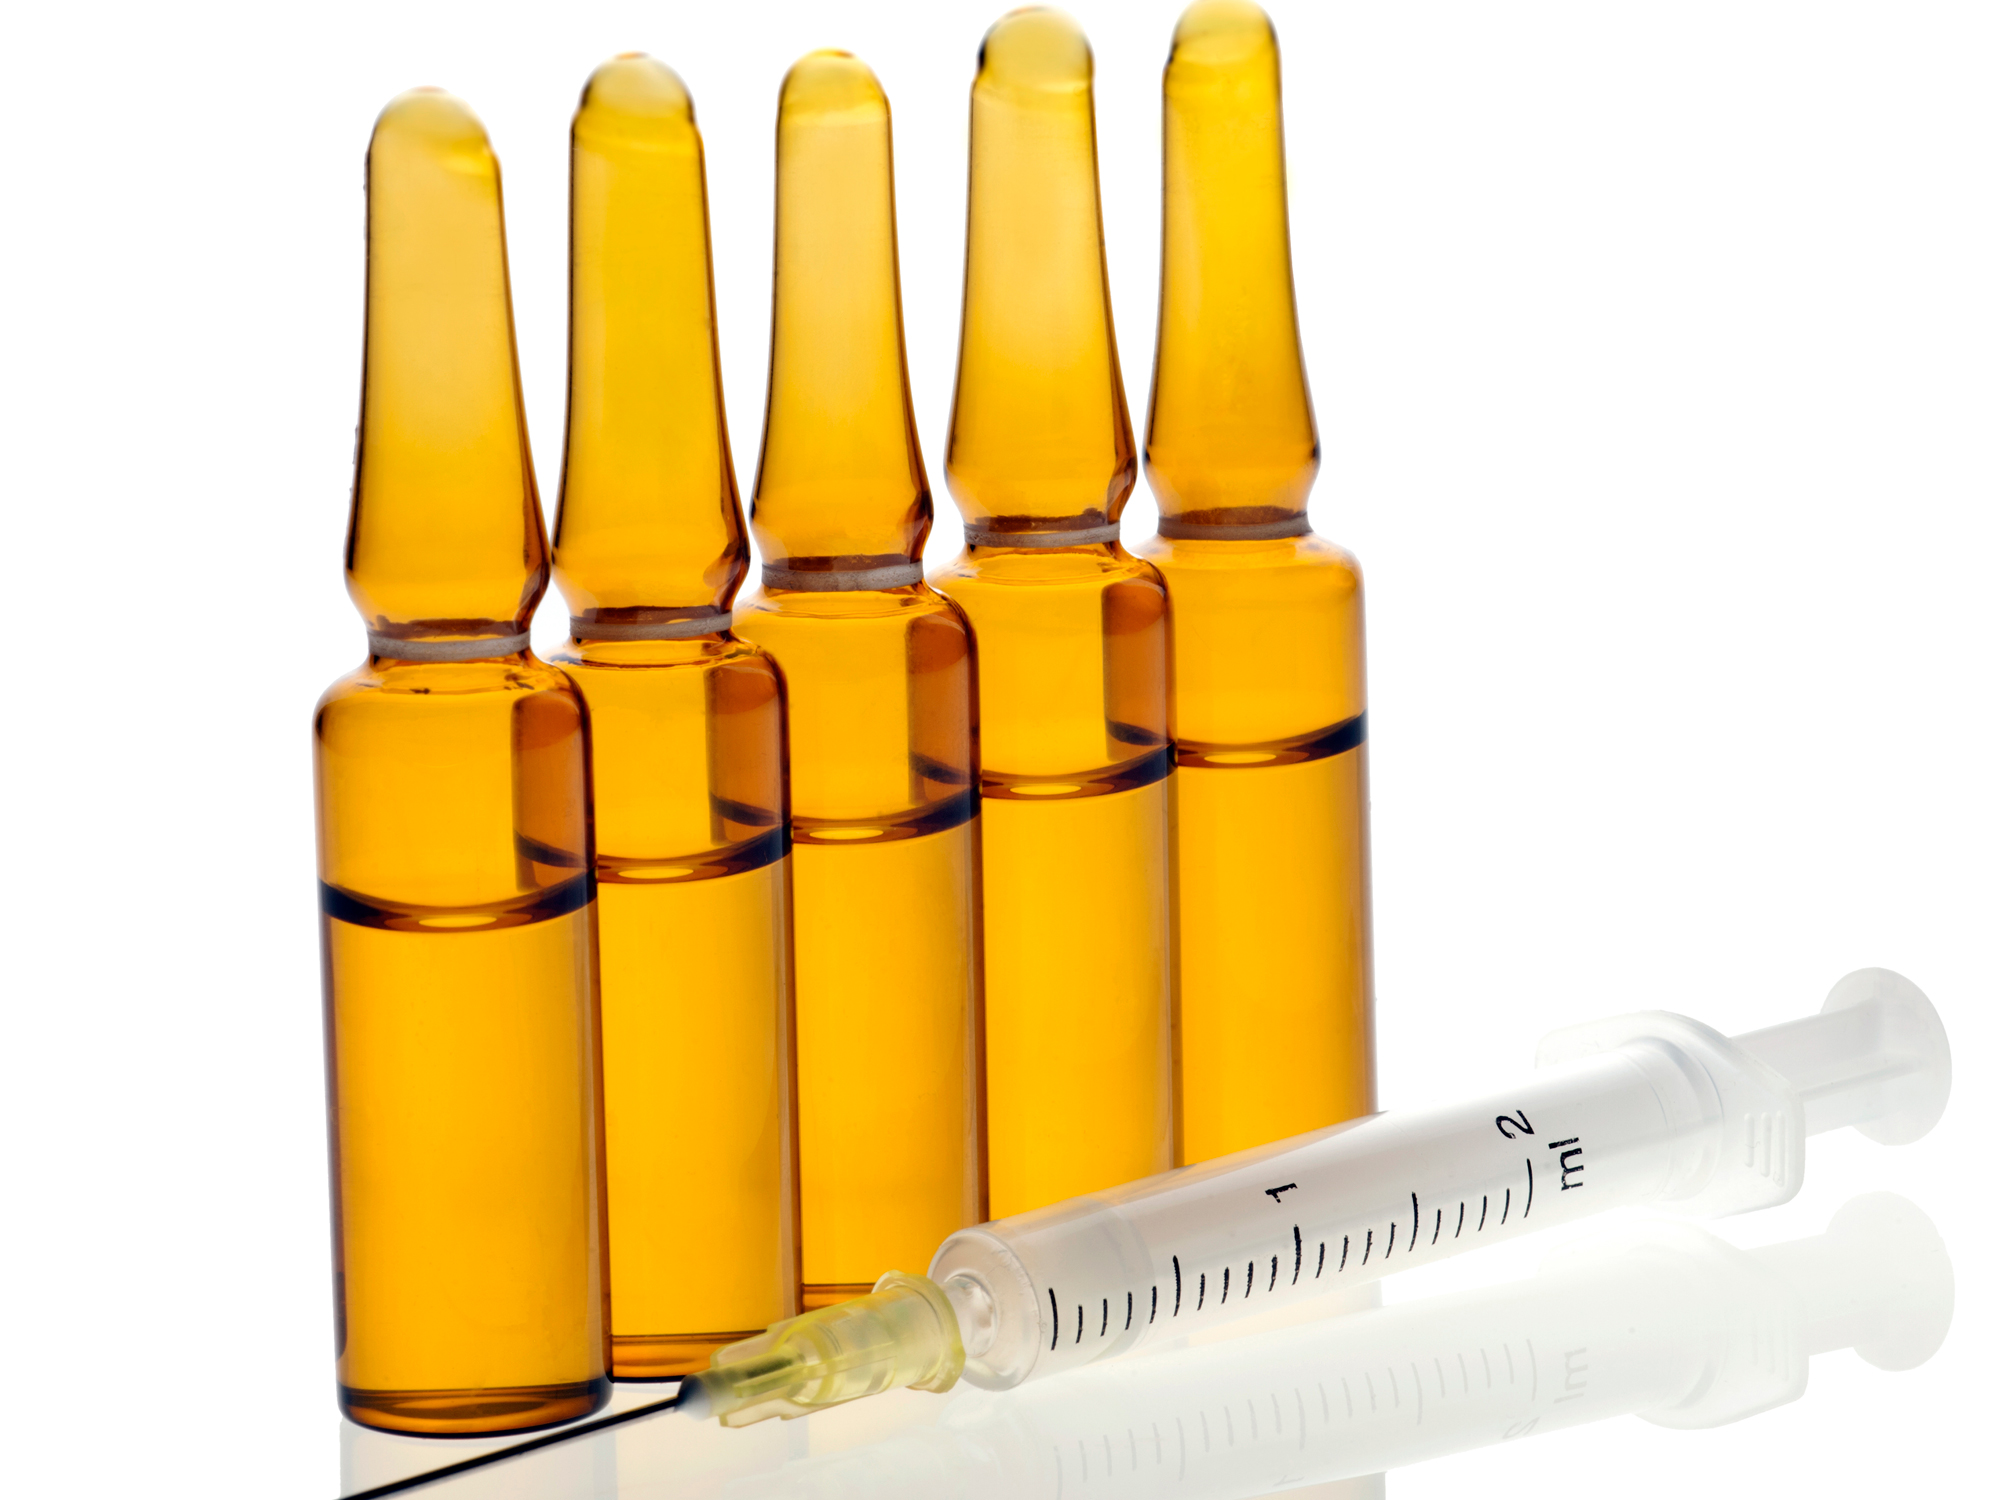 Injectable nutrients: Worth it to feel better fast?